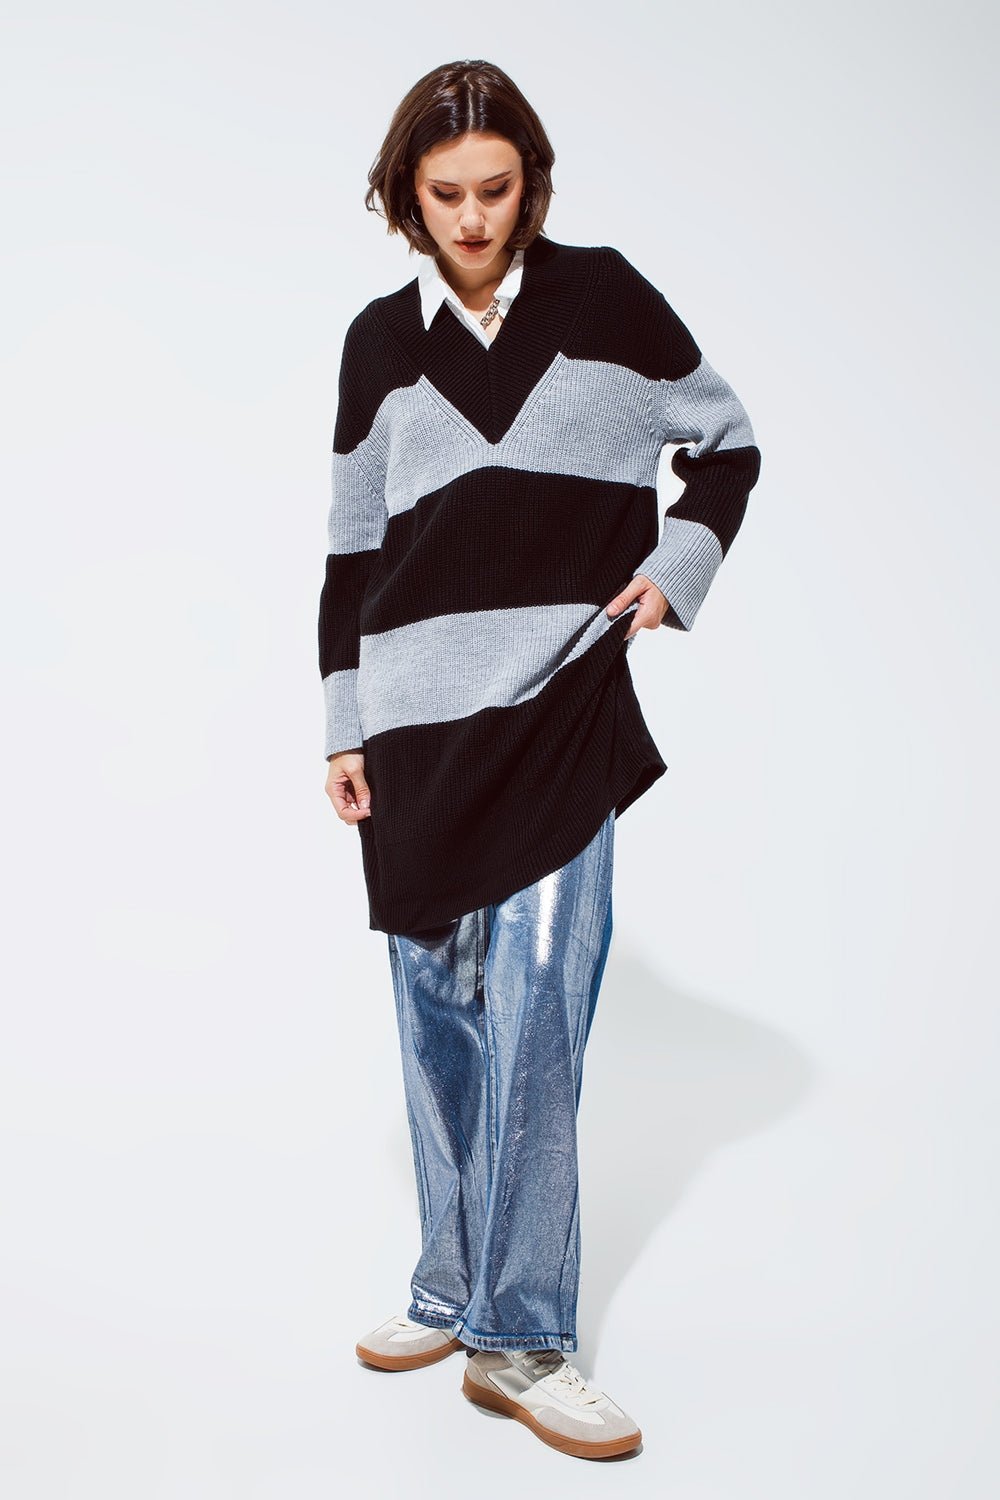 Oversized MIDI Knitted Dress With Stripes and a Wide v Neck - Mack & Harvie